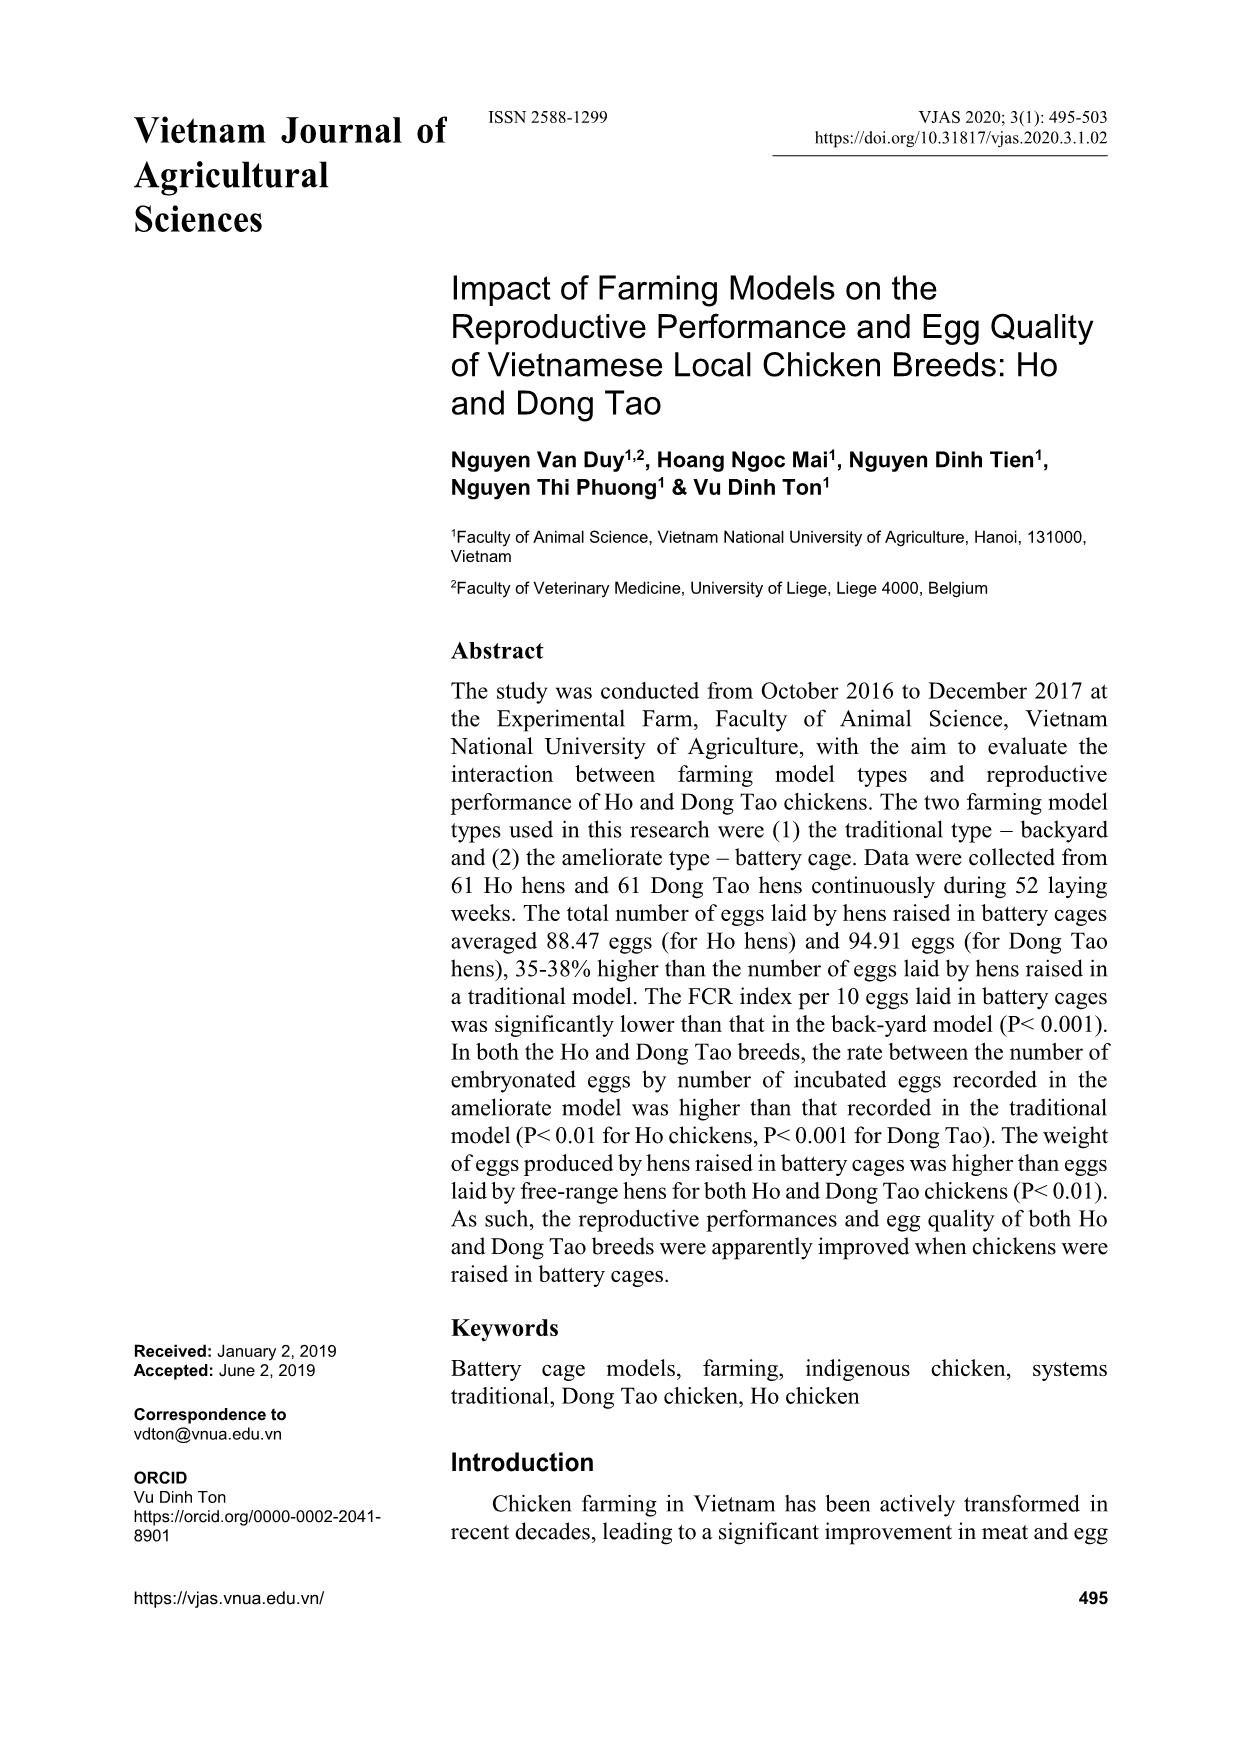 Impact of farming models on the reproductive performance and egg quality of Vietnamese local chicken breeds: Ho and Dong Tao trang 1